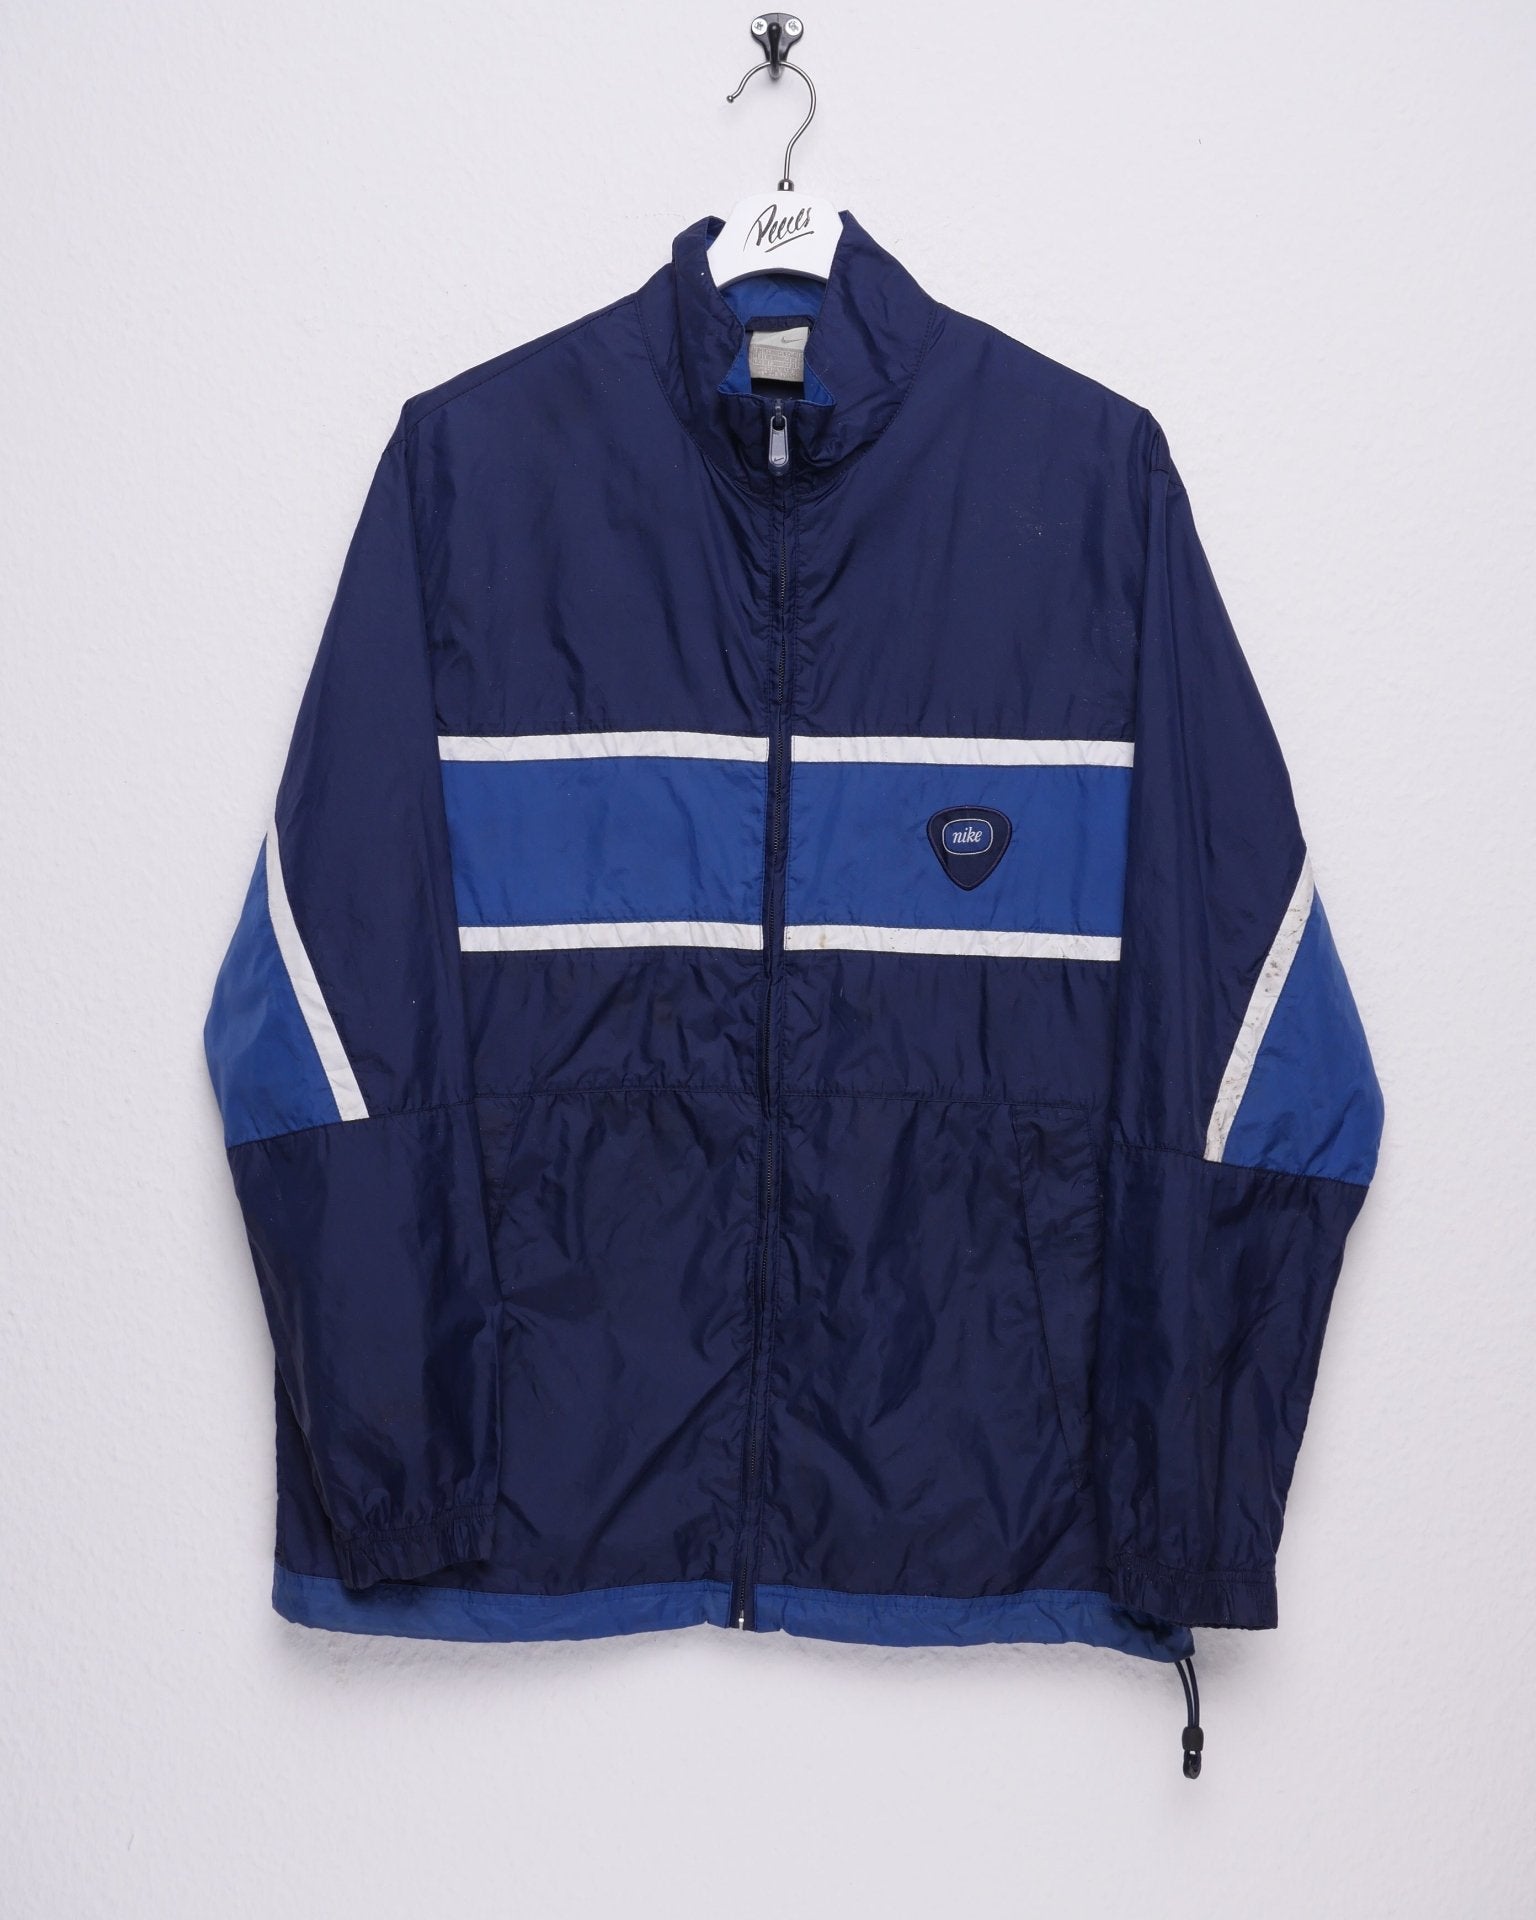 Nike embroidered Logo two toned Vintage Track Jacket - Peeces